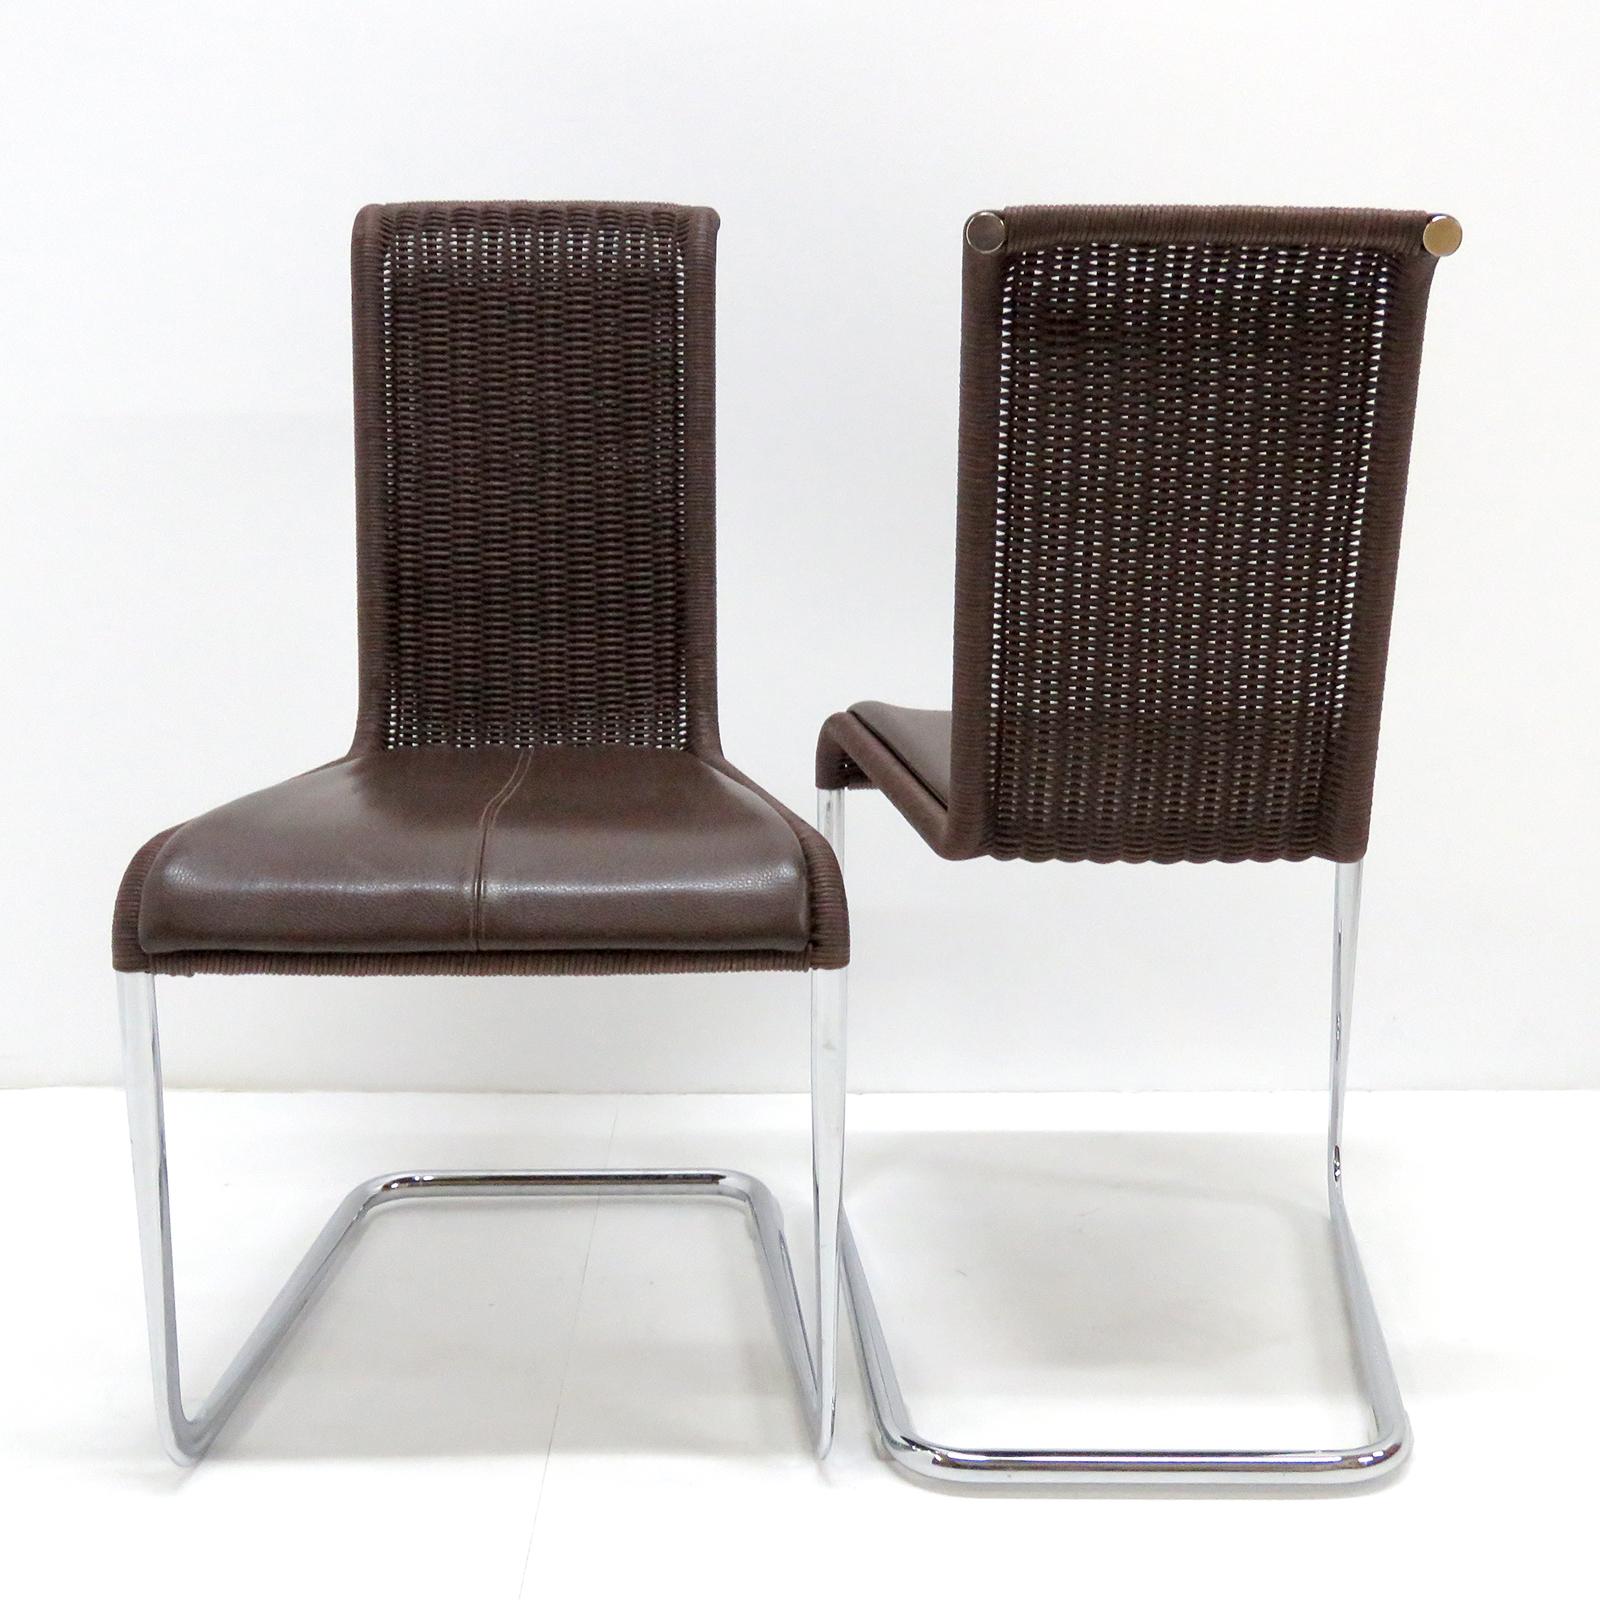 Axel Brüchhauser for Tecta B45 High Back Chairs, 1981 For Sale 4